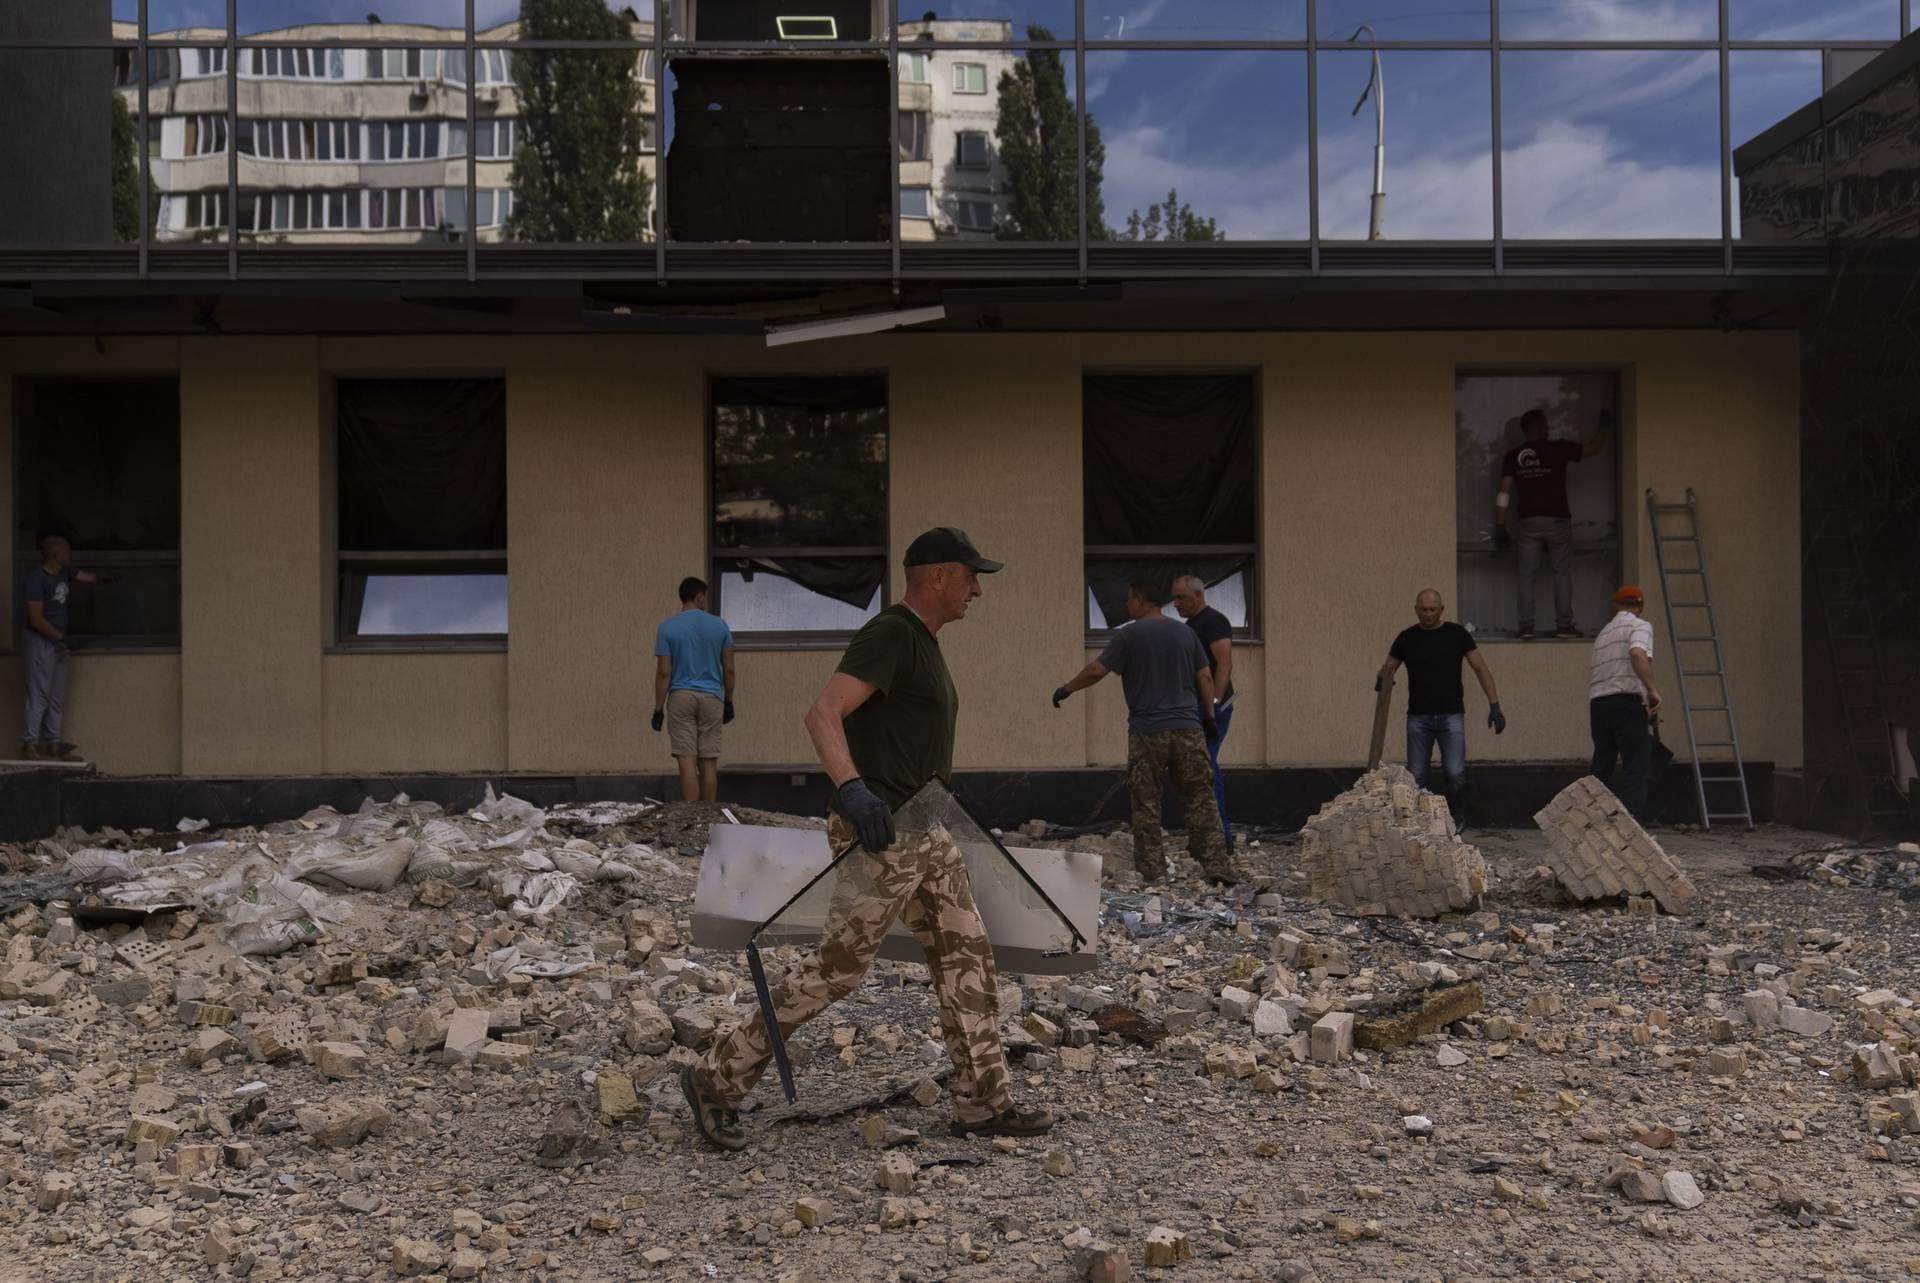 People clean up debris outside a damaged government building in Kyiv